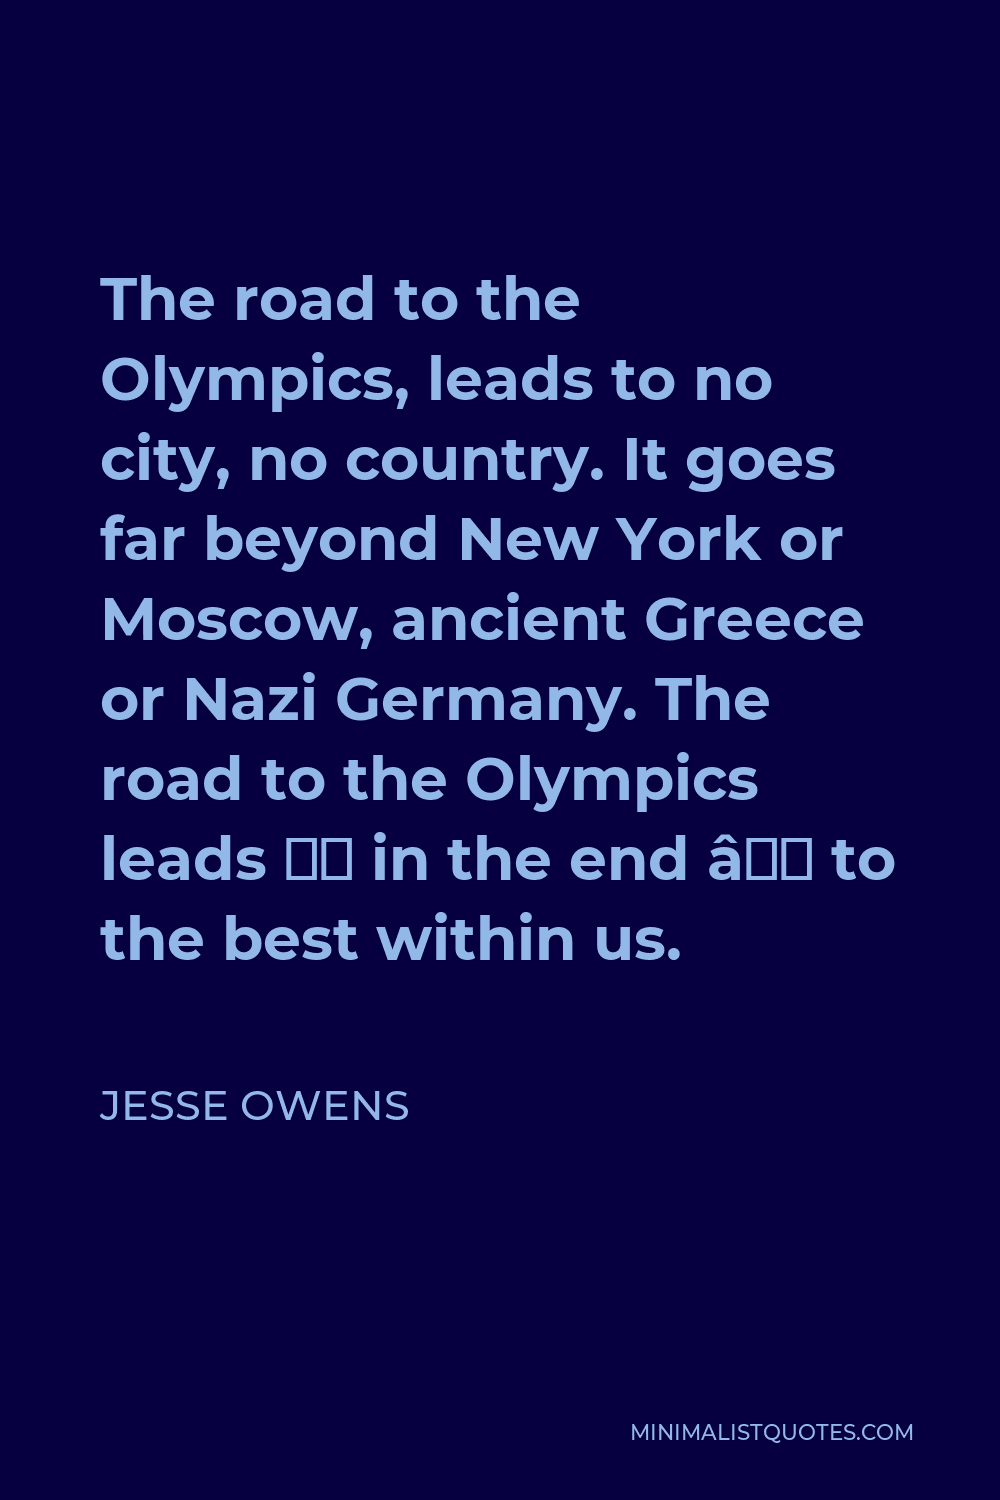 Jesse Owens Quote - The road to the Olympics, leads to no city, no country. It goes far beyond New York or Moscow, ancient Greece or Nazi Germany. The road to the Olympics leads — in the end — to the best within us.